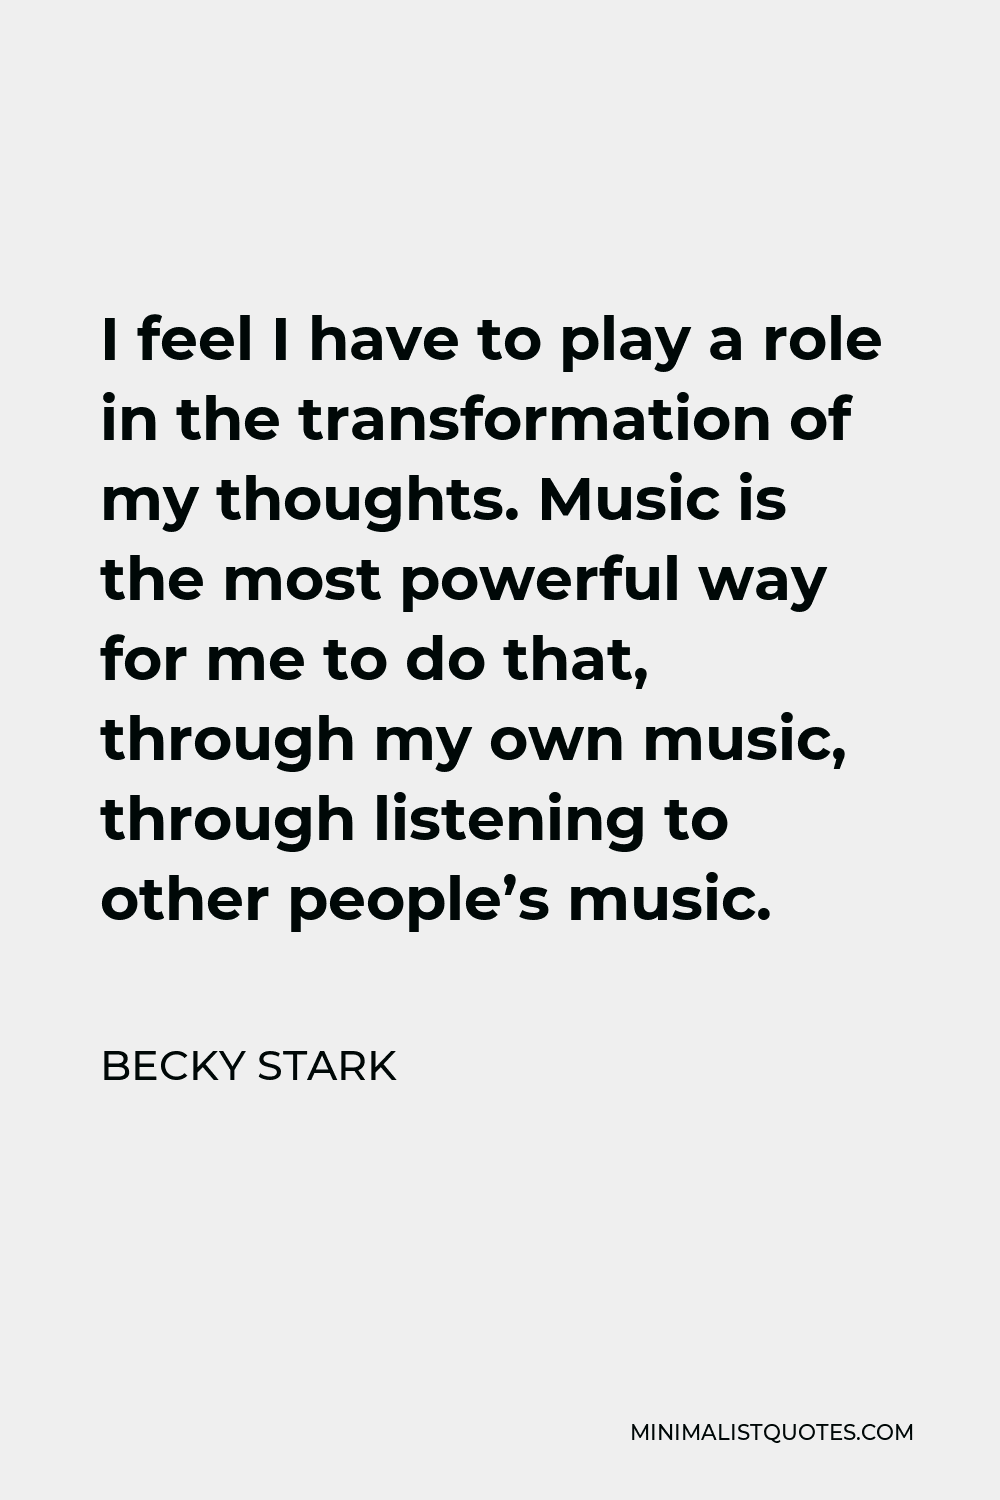 Becky Stark Quote - I feel I have to play a role in the transformation of my thoughts. Music is the most powerful way for me to do that, through my own music, through listening to other people’s music.